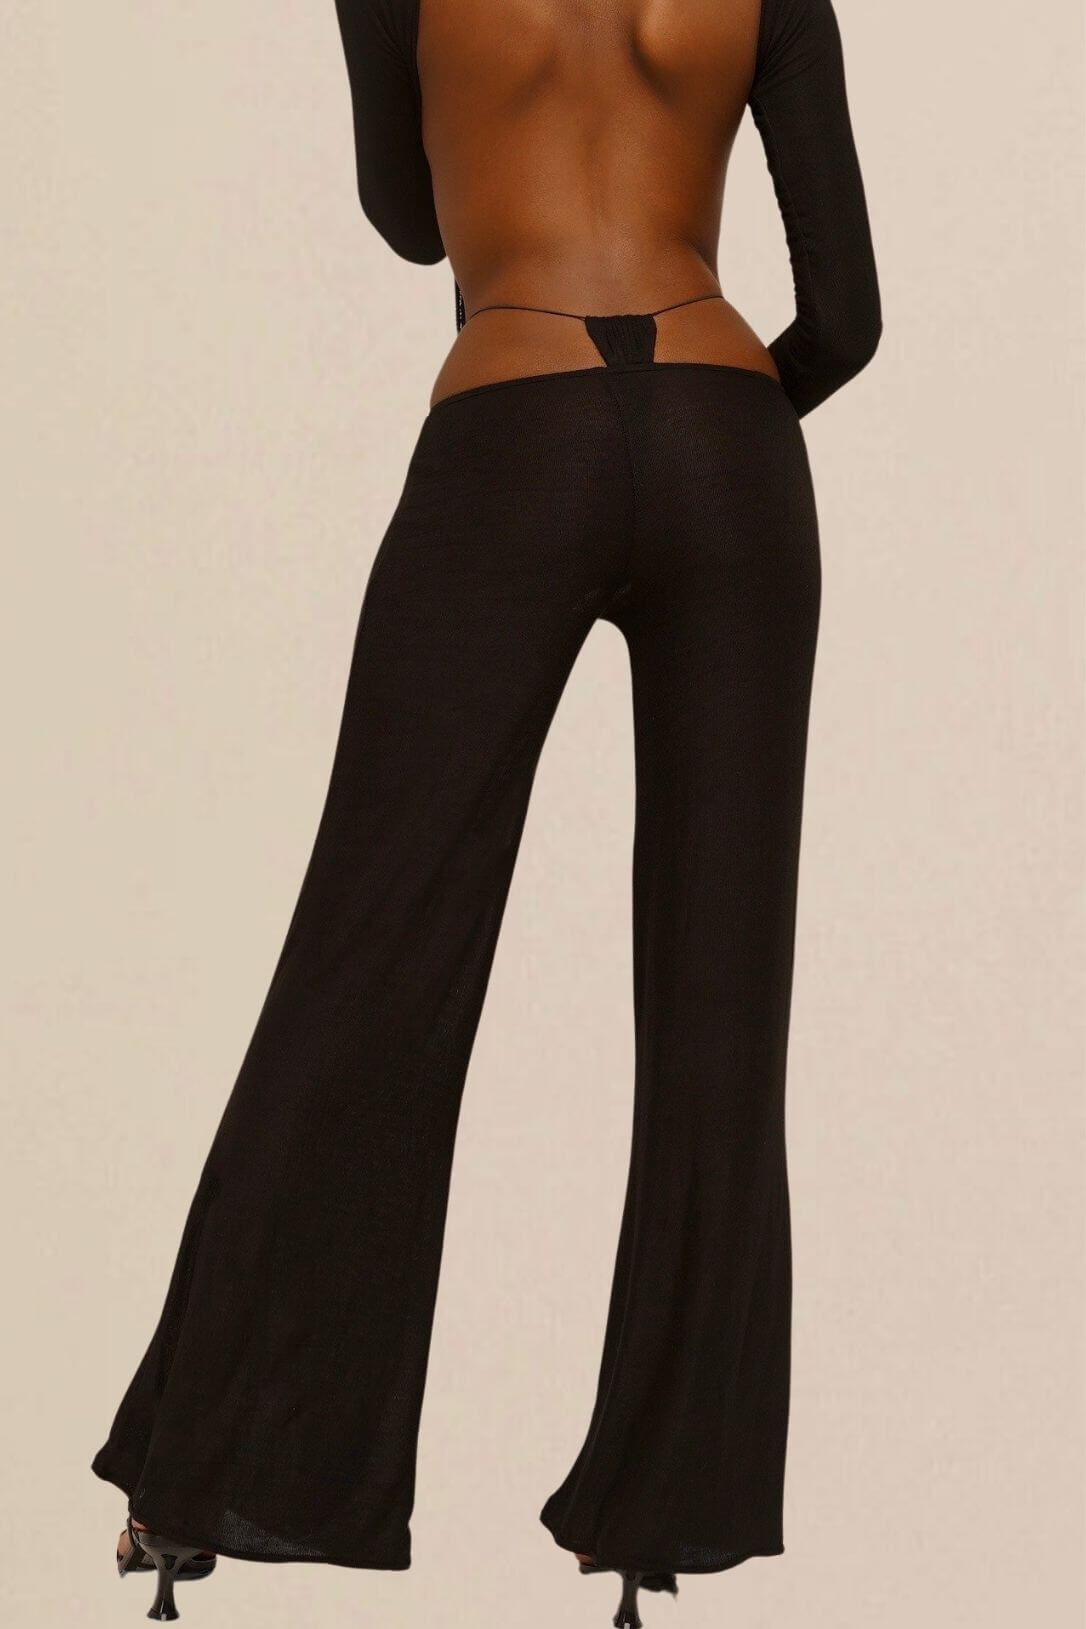 Black DEMI pants from JET NOIRE from the back